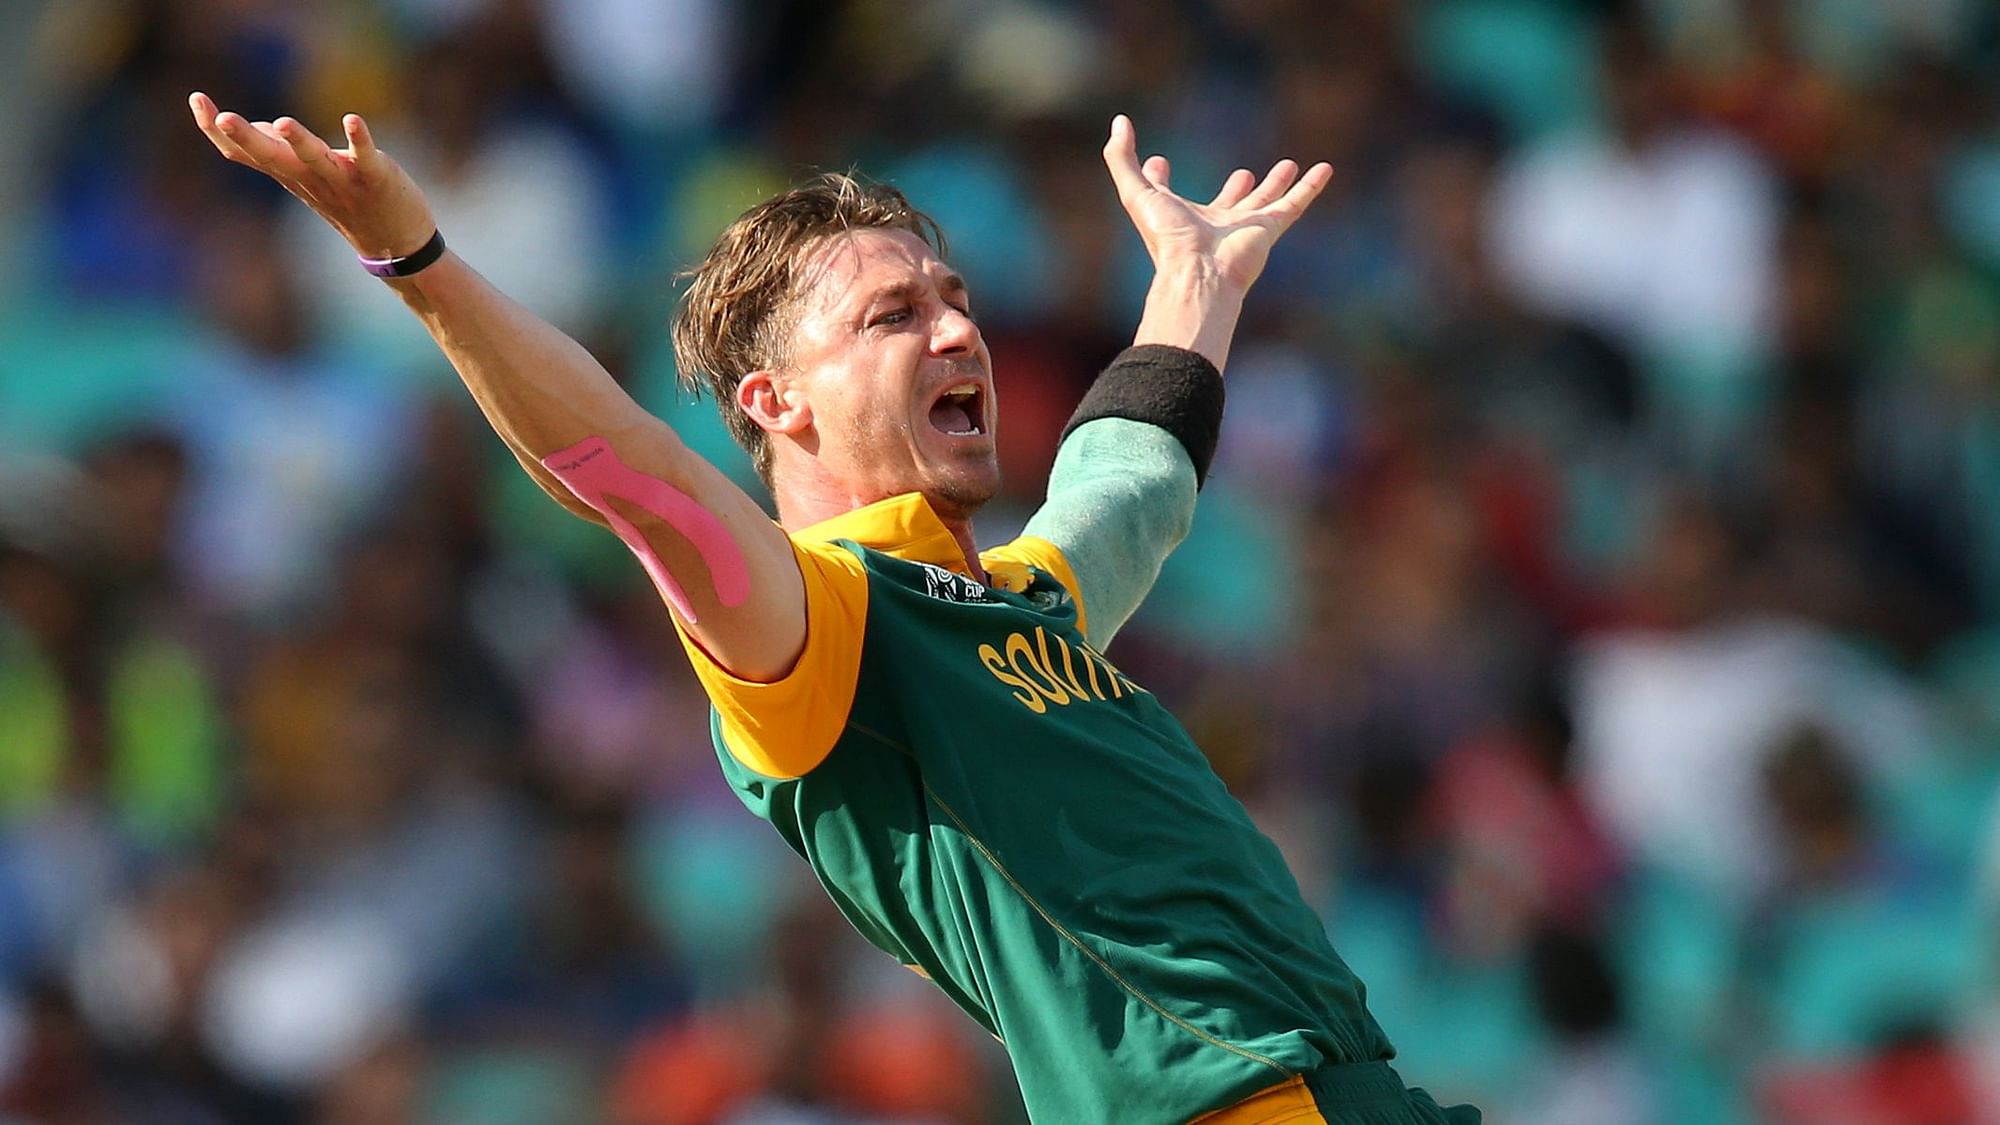 South African pacer Dale Steyn has said this year’s Twenty20 World Cup is very much on his “agenda”.